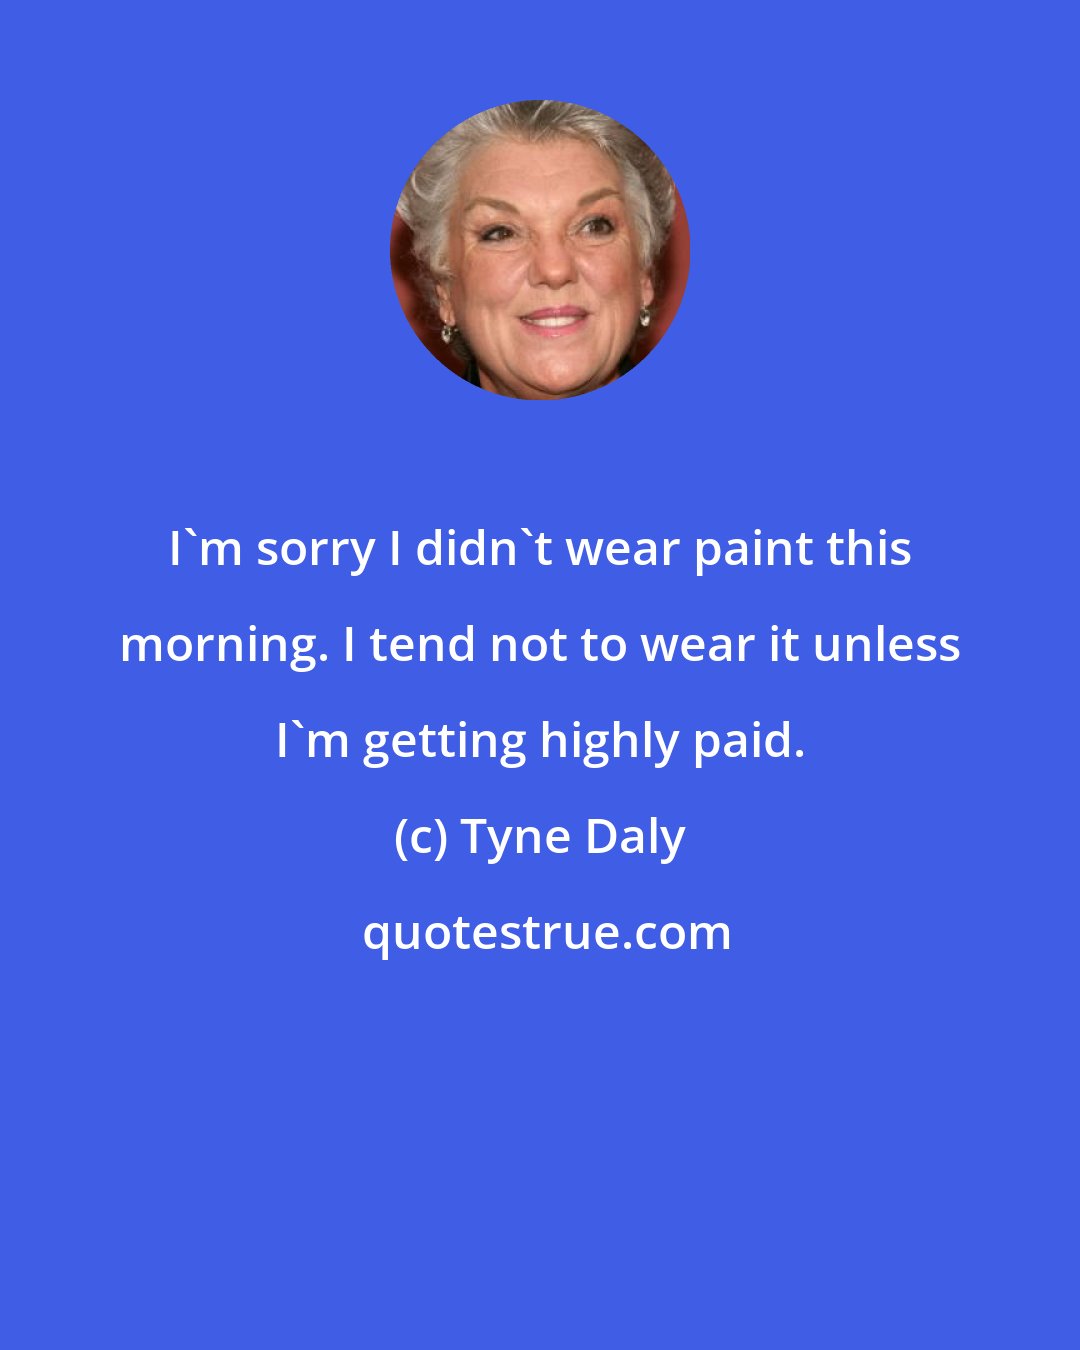 Tyne Daly: I'm sorry I didn't wear paint this morning. I tend not to wear it unless I'm getting highly paid.